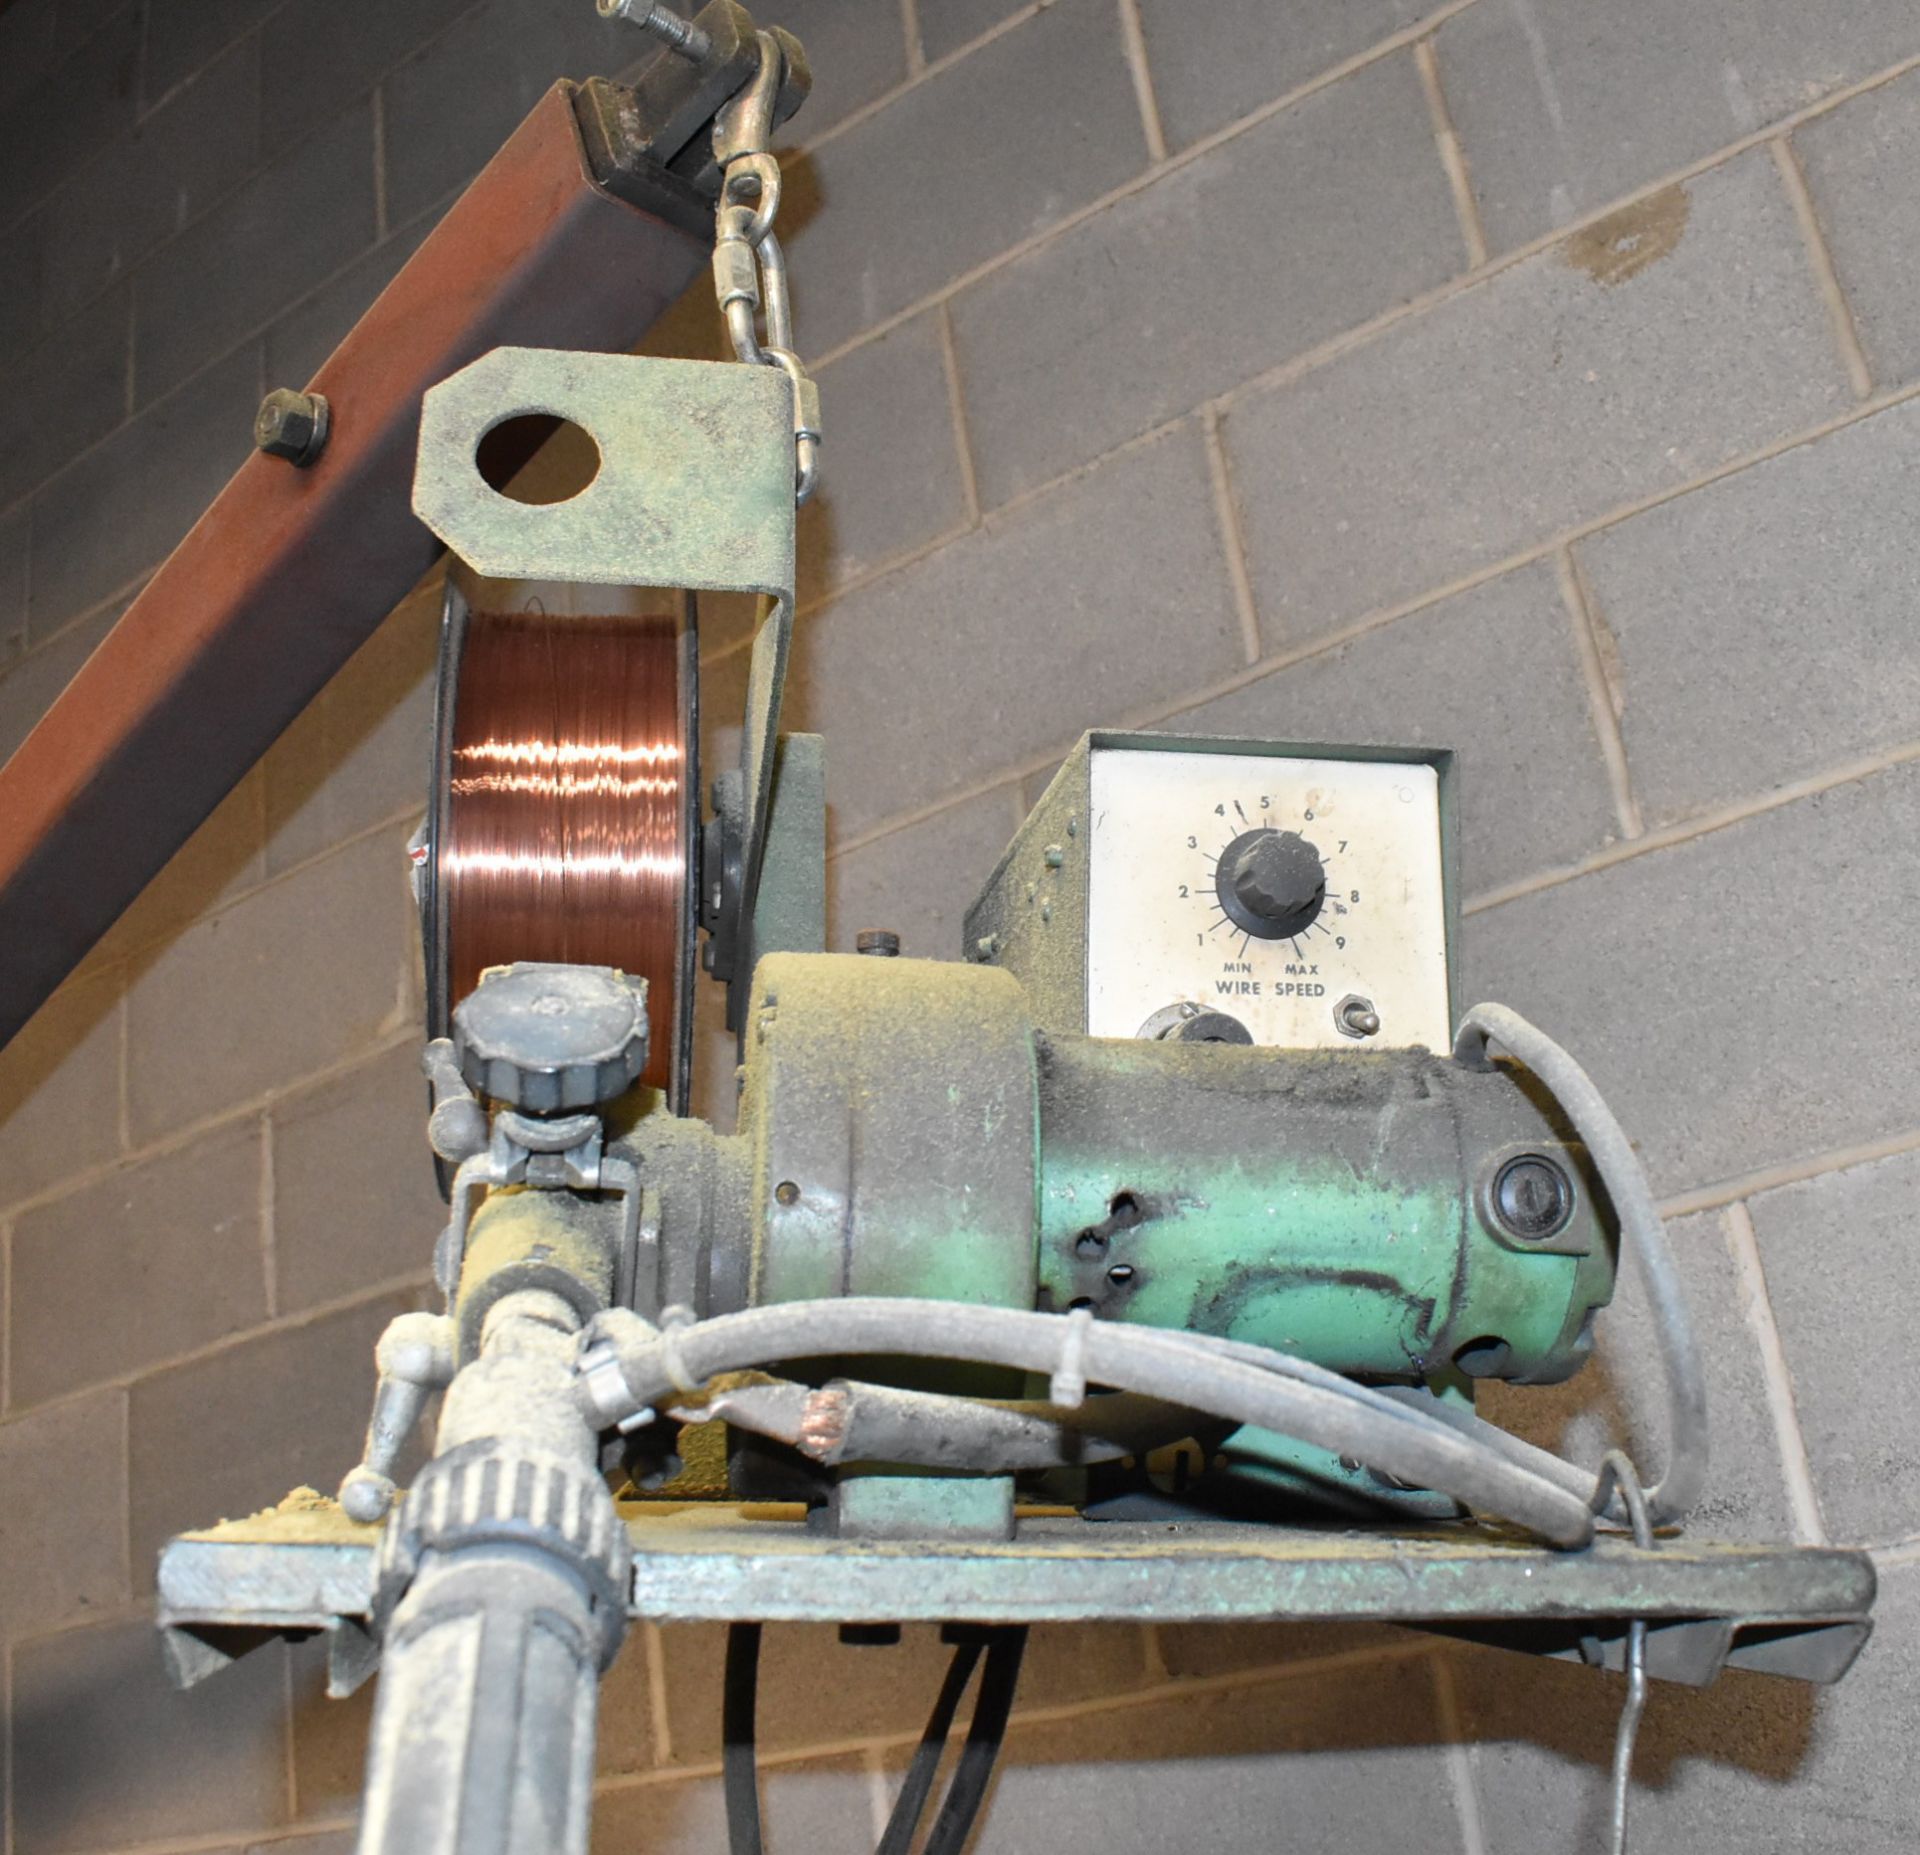 CANOX C-DW-450 MIG WELDER WITH WIRE FEEDER, BOOM, CABLES & GUN, S/N: JG056723 (TANK NOT INCLUDED) - Image 6 of 7